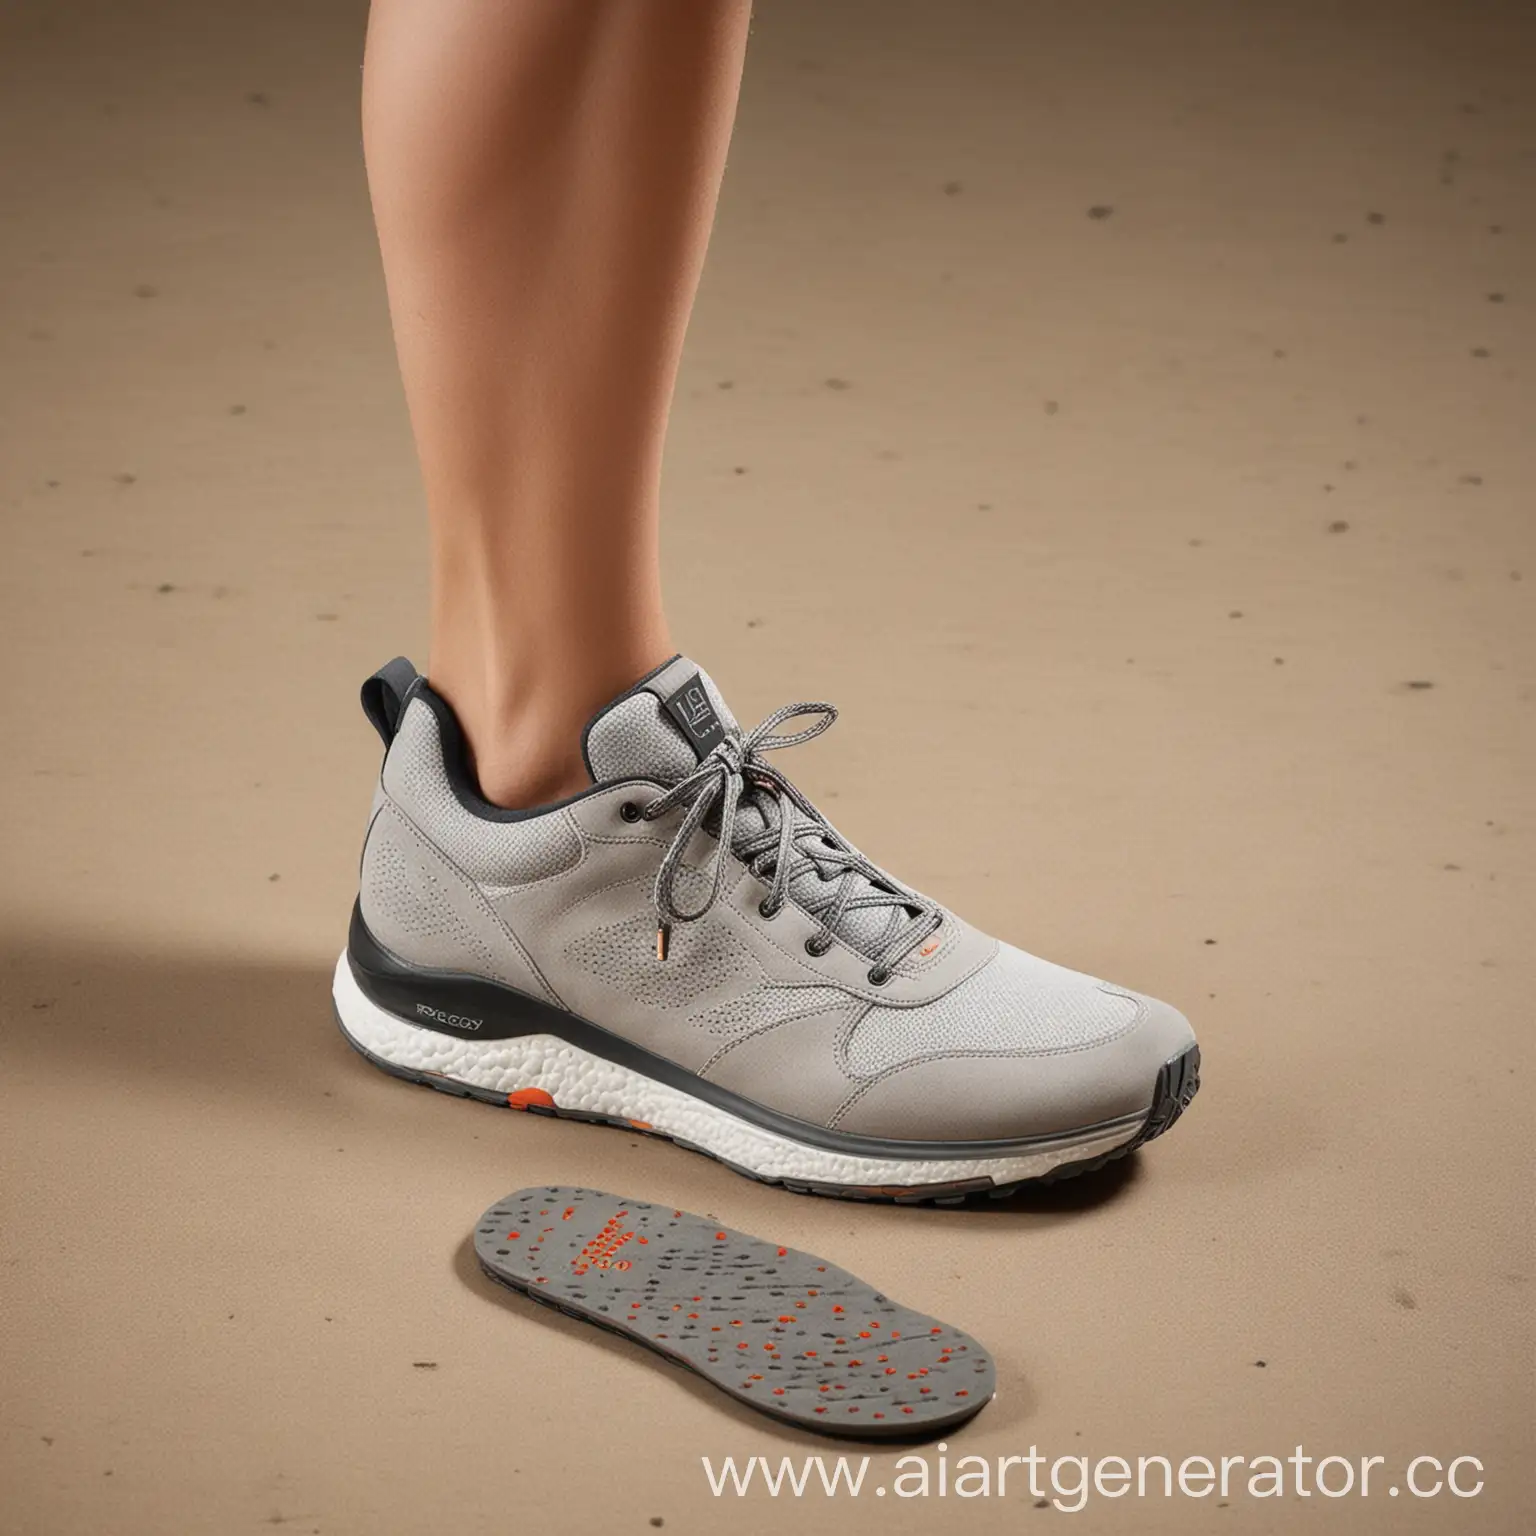 GEOX-Smart-Comfort-Shoes-Innovative-Technology-for-Maximum-Comfort-and-Sustainability